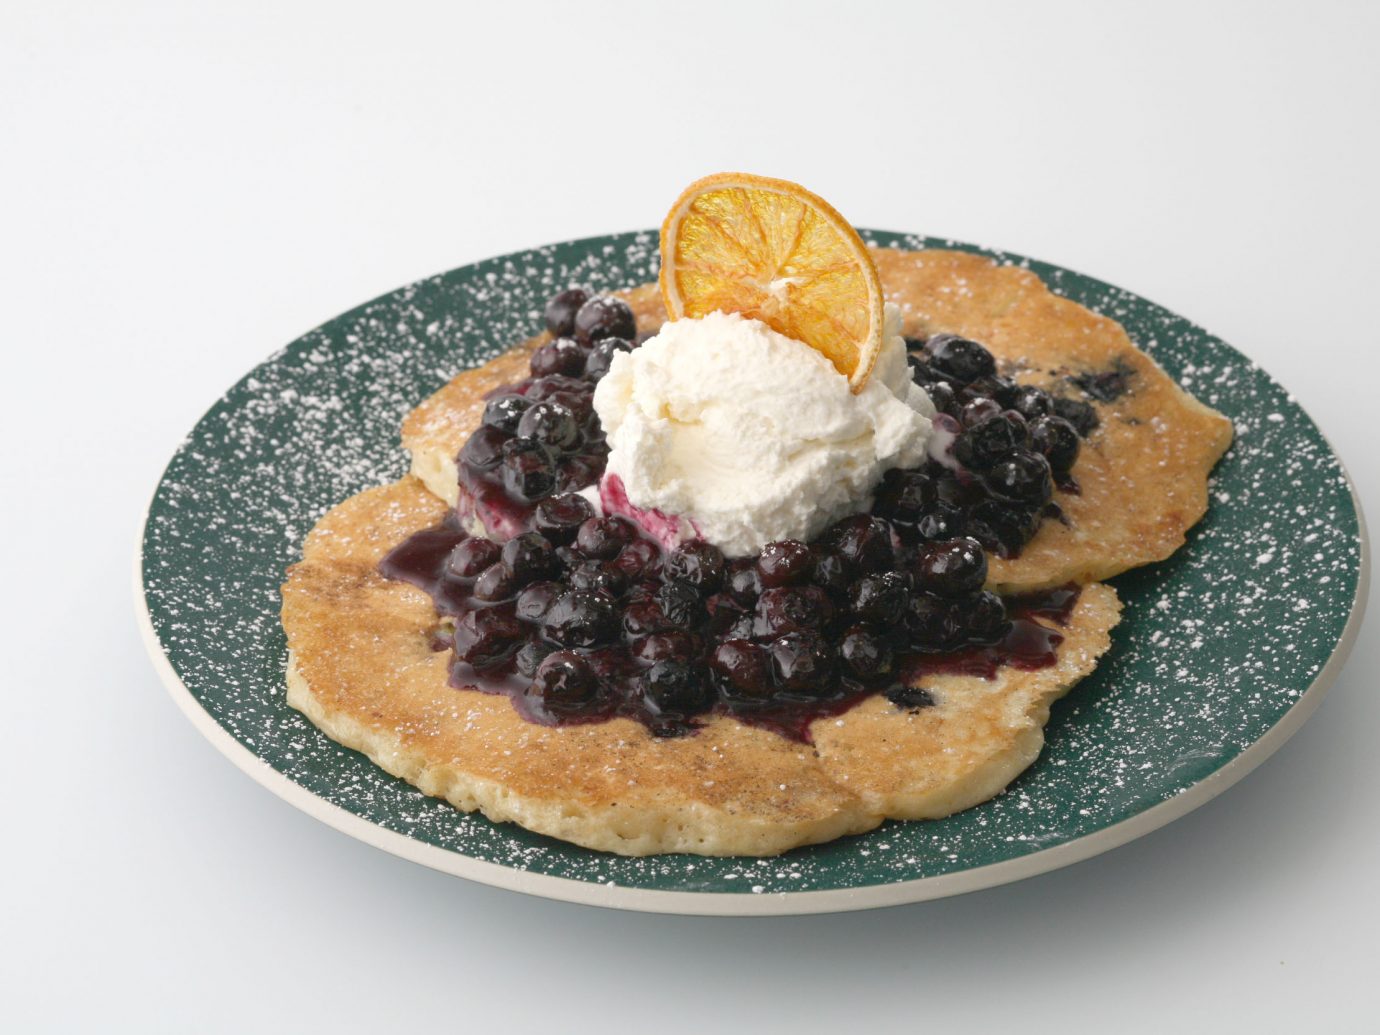 Blueberry pancakes with whipped cream and orange slice